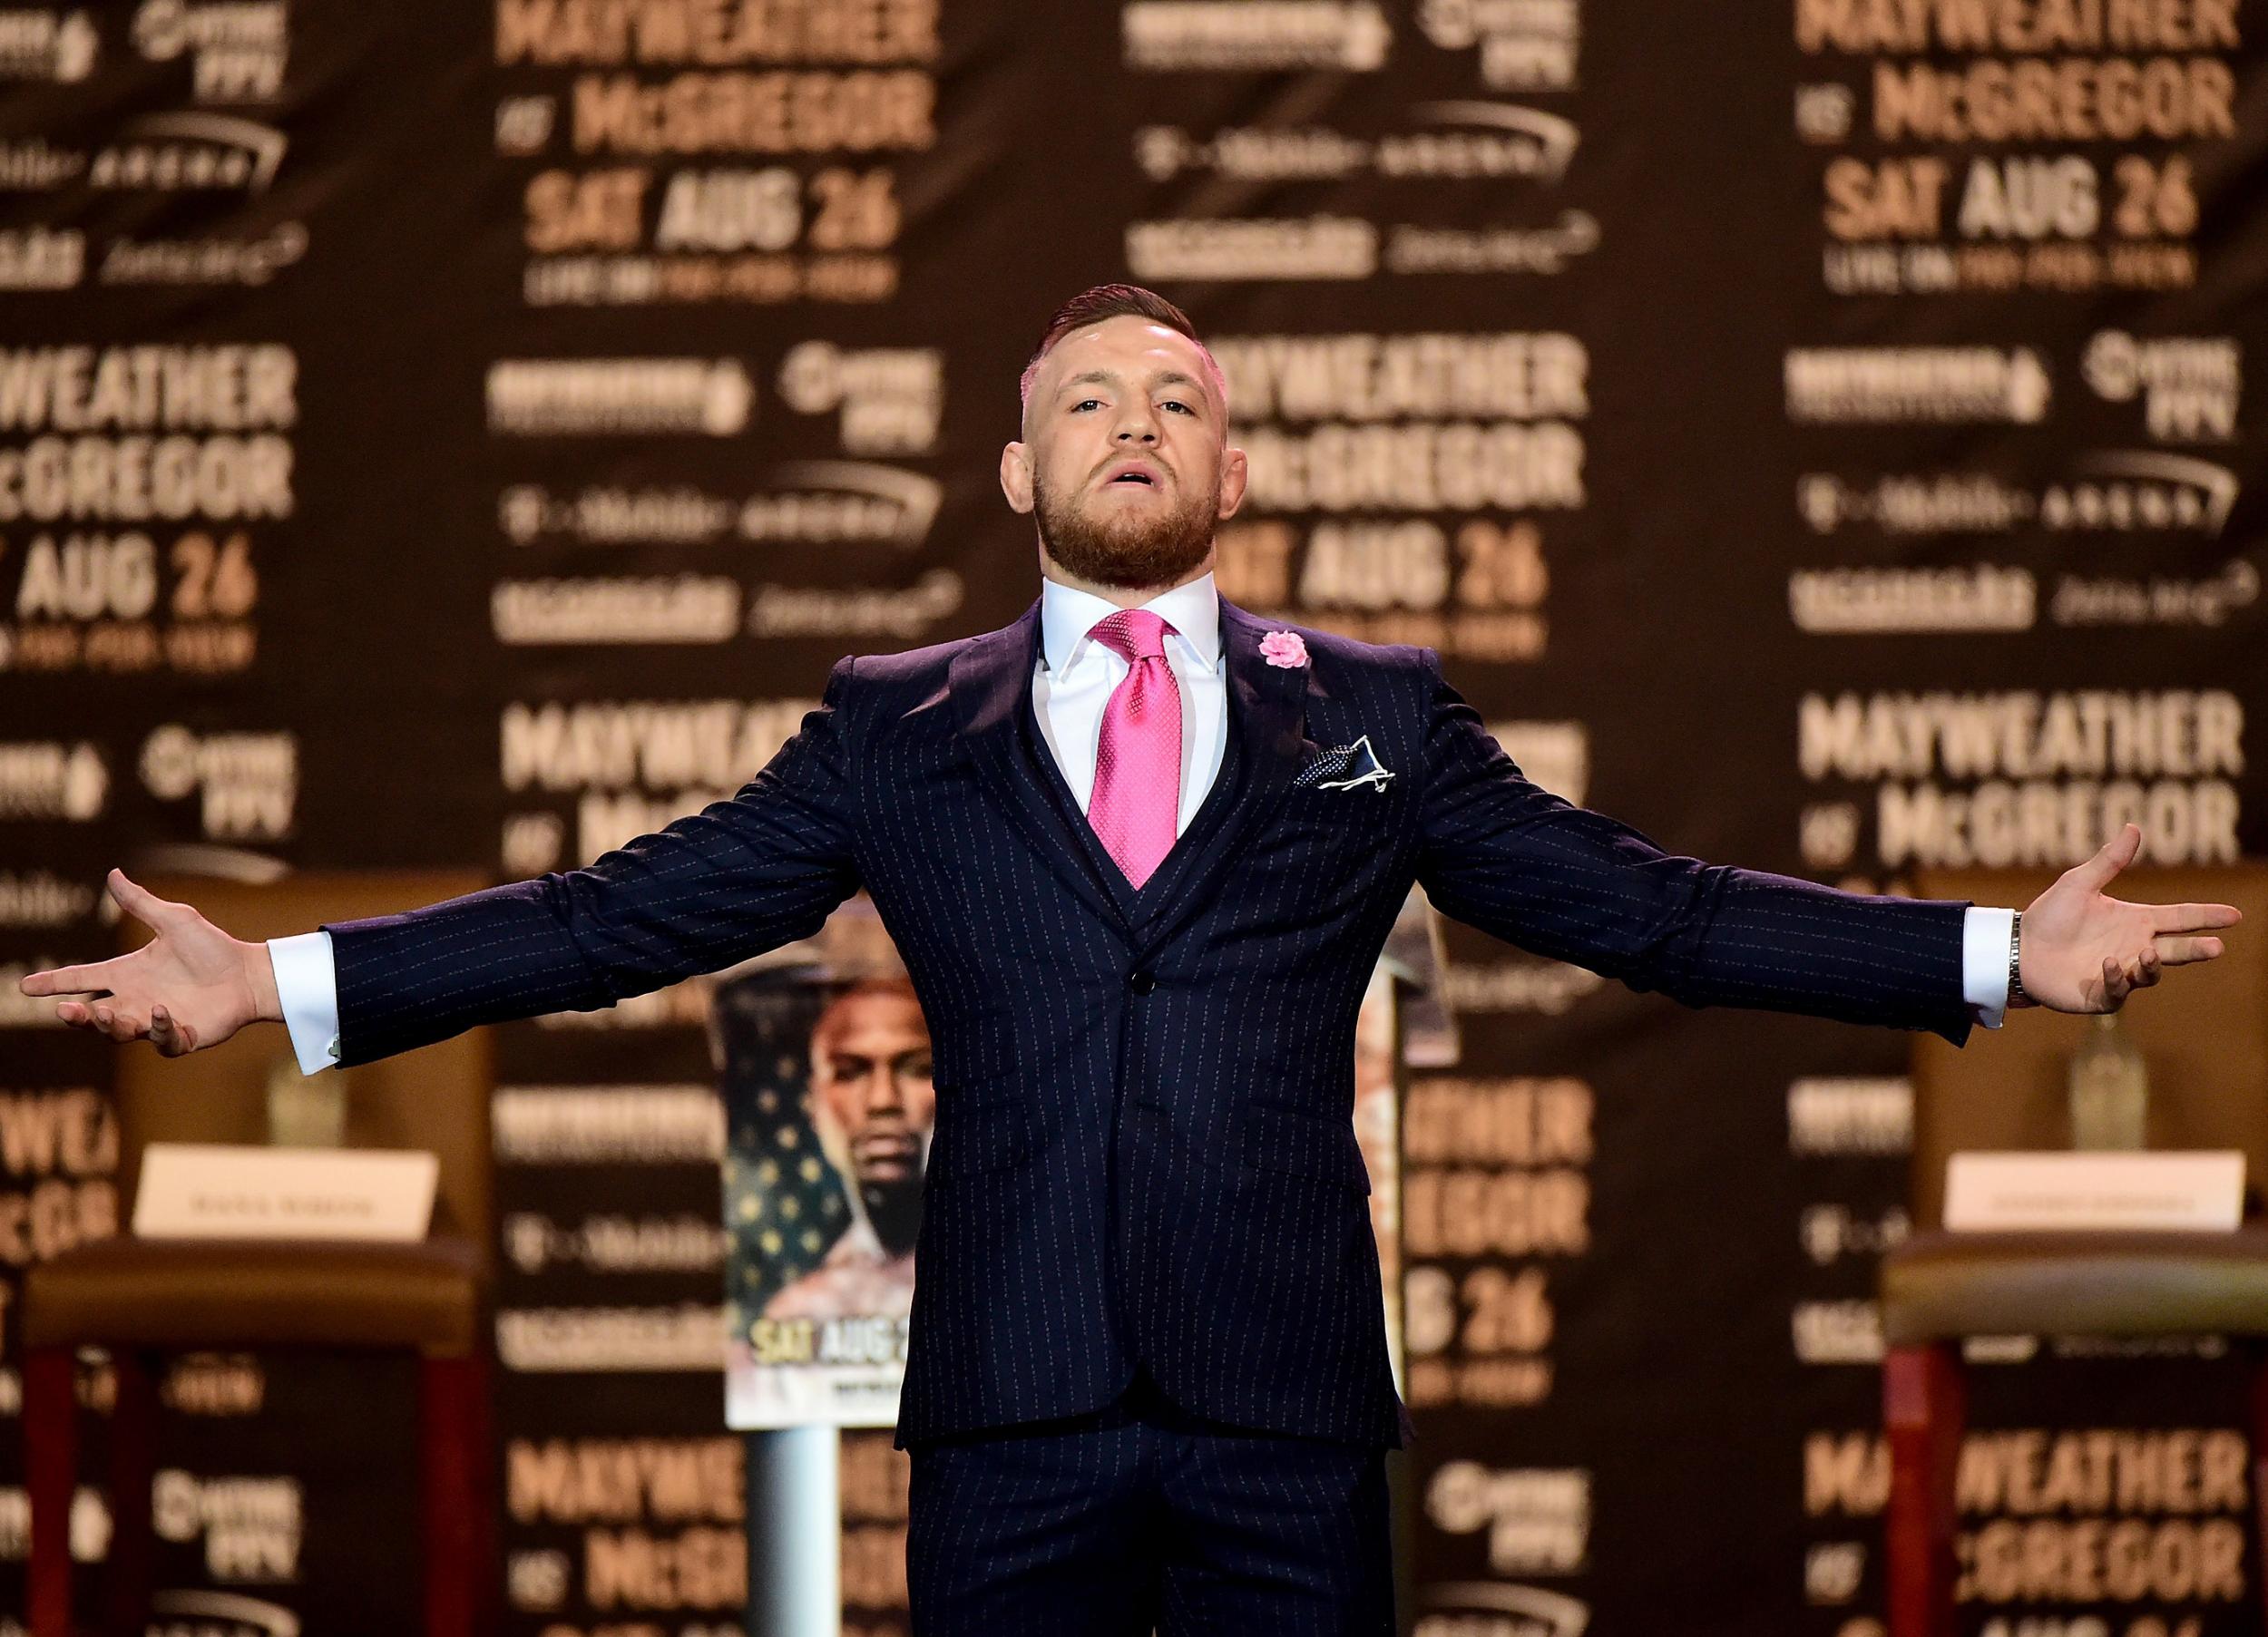 The public are on McGregor's side